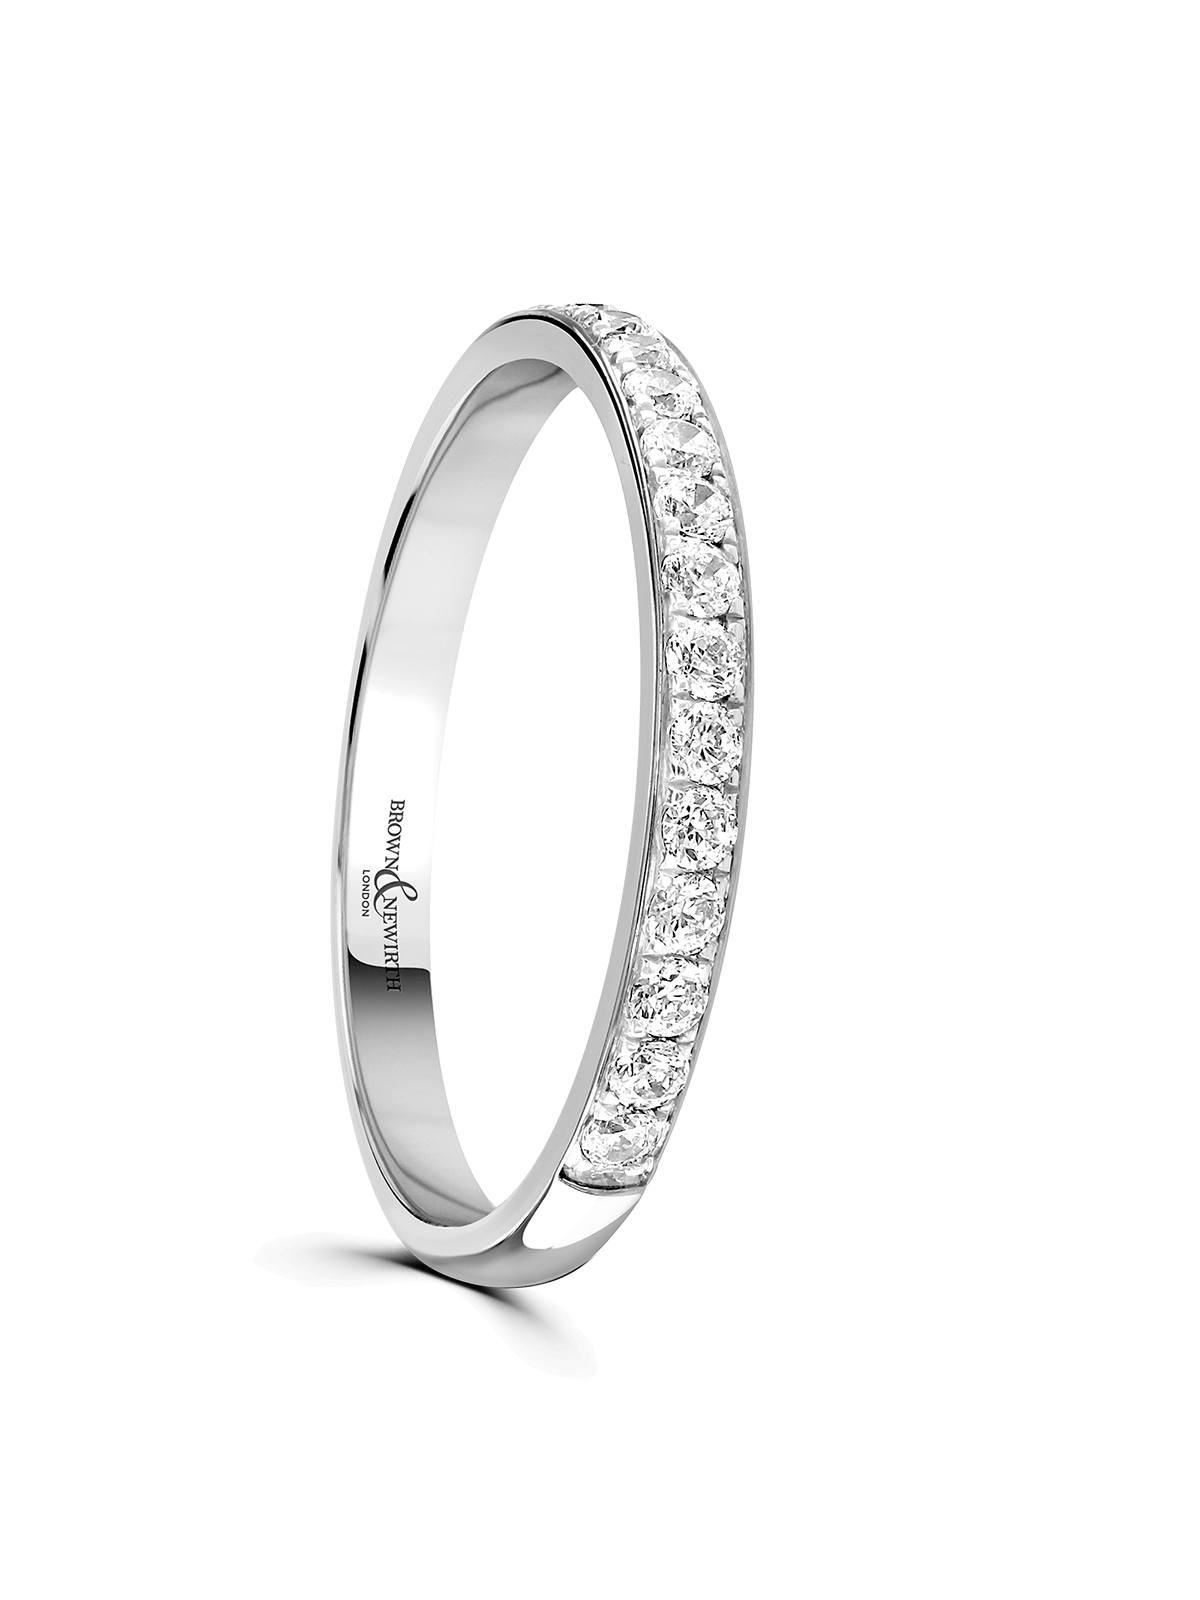 Brown & Newirth Sweetheart 0.20ct Brilliant Cut Diamond Eternity Ring in 9ct White Gold